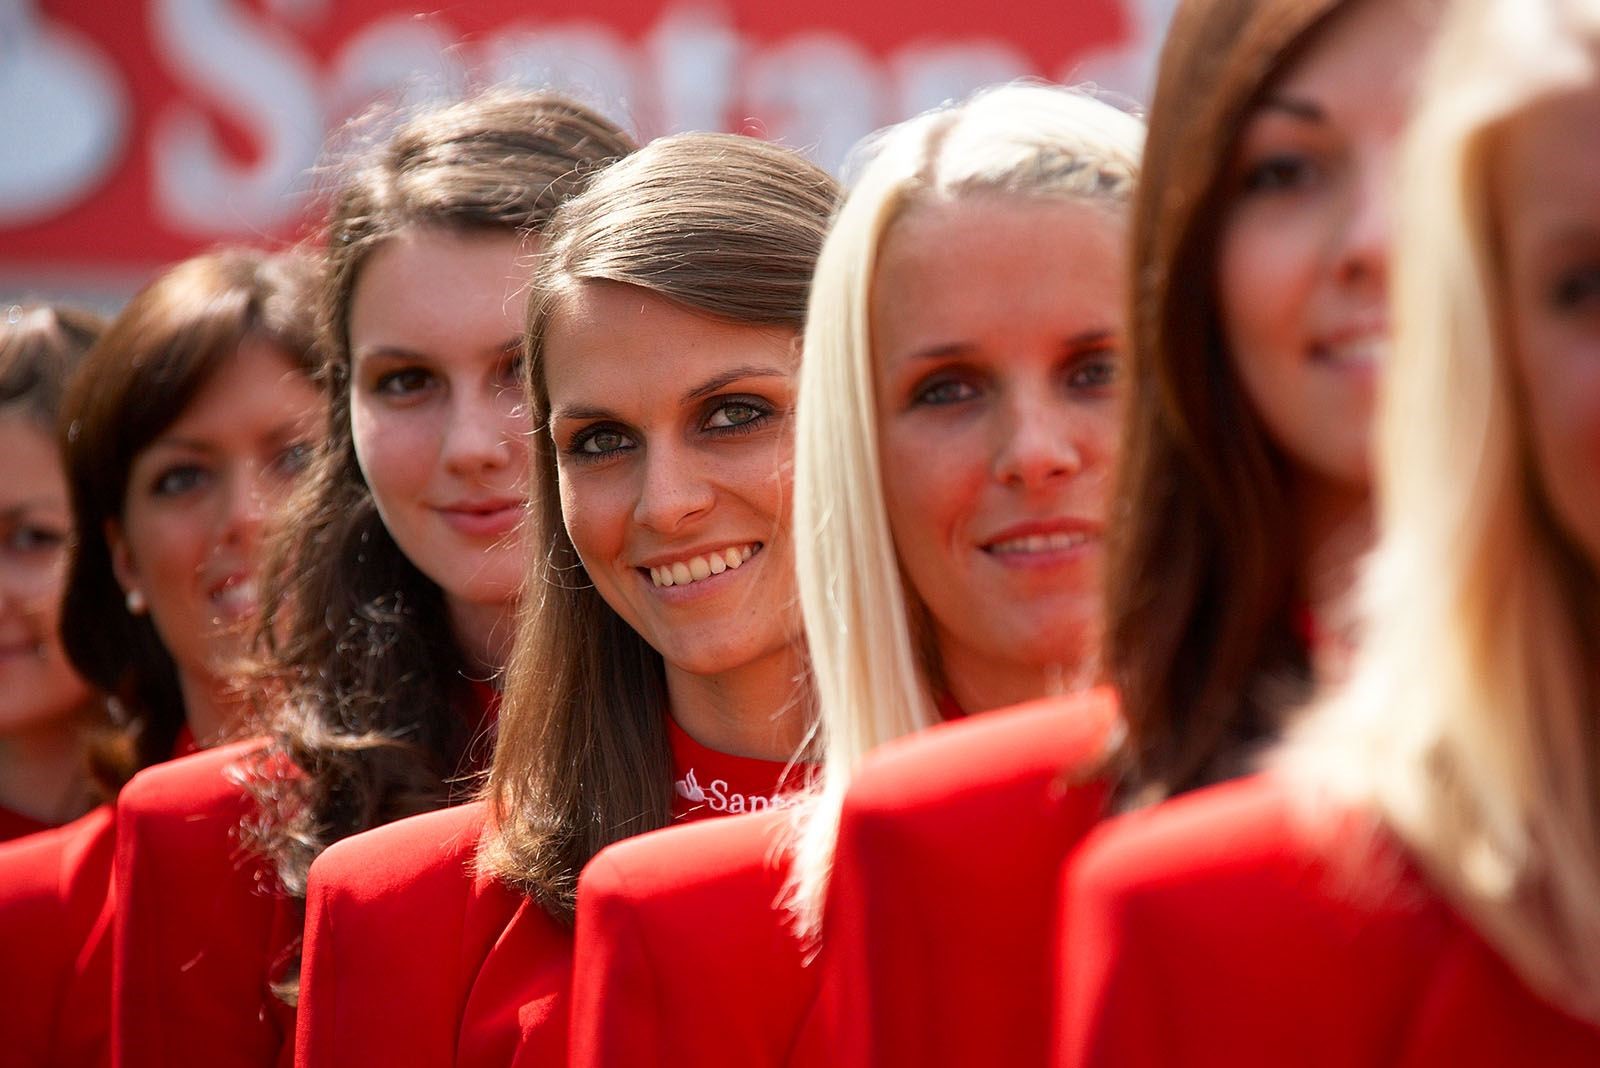 Formula 1, girls at Silverstone, Great Britain, in 2011.